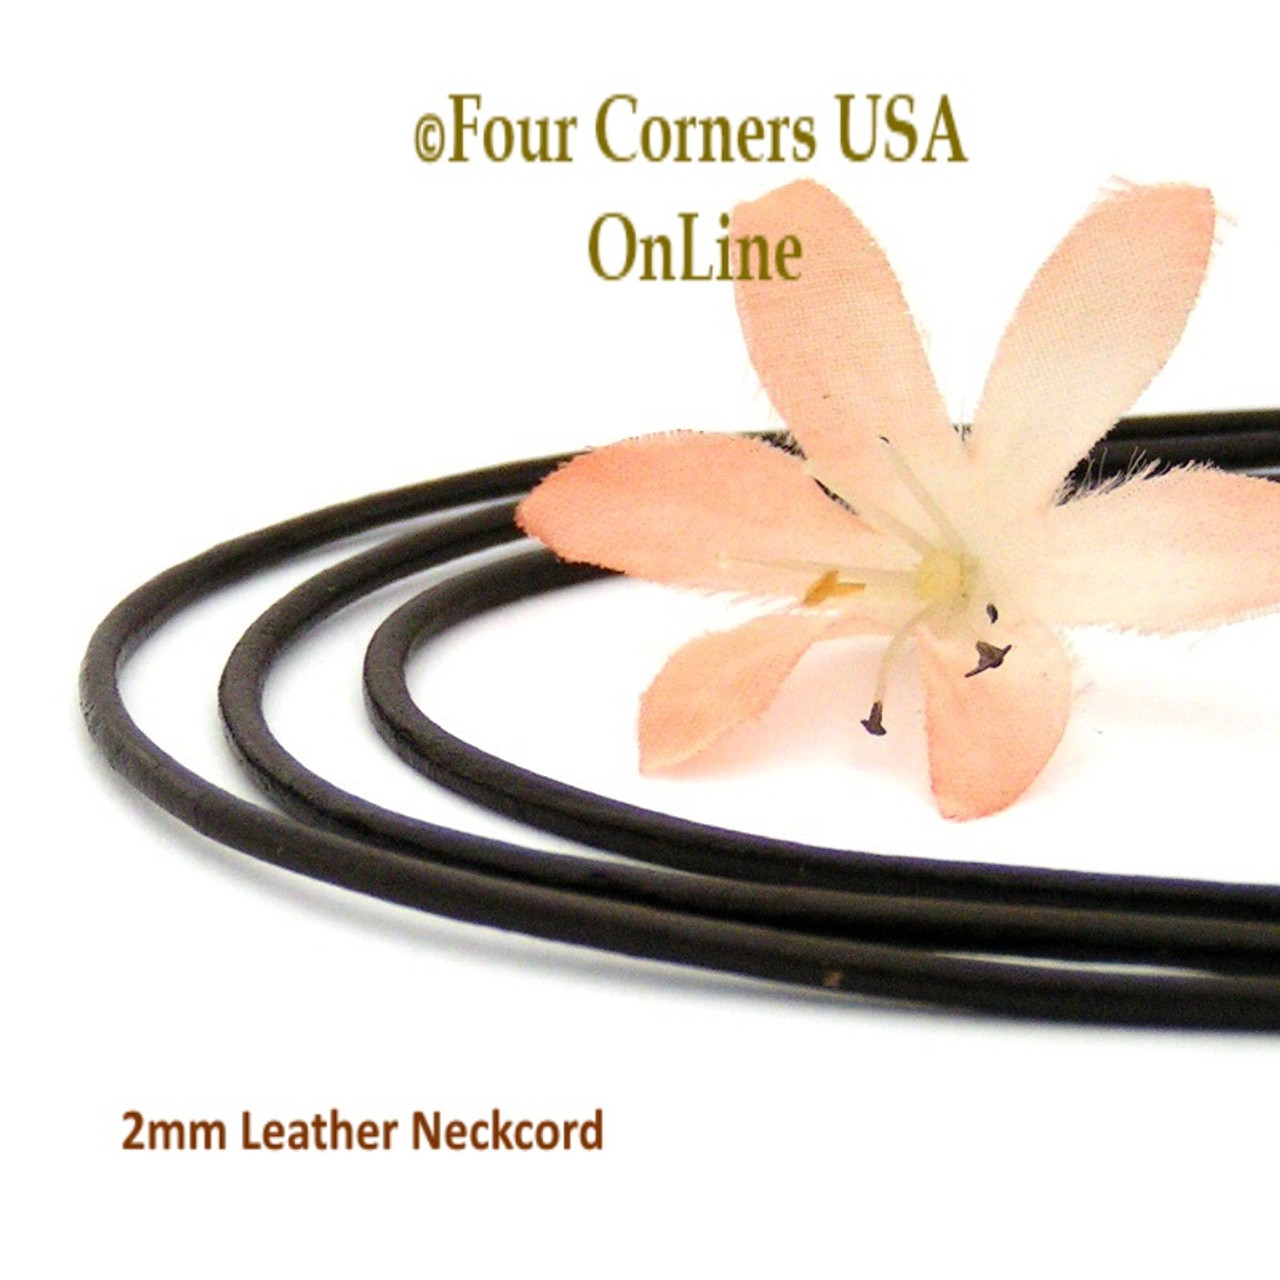 2mm Brown 20 Inch Leather Sterling Silver Necklace Cord FCN-1503-20  Closeout Final Sale - Four Corners USA Online